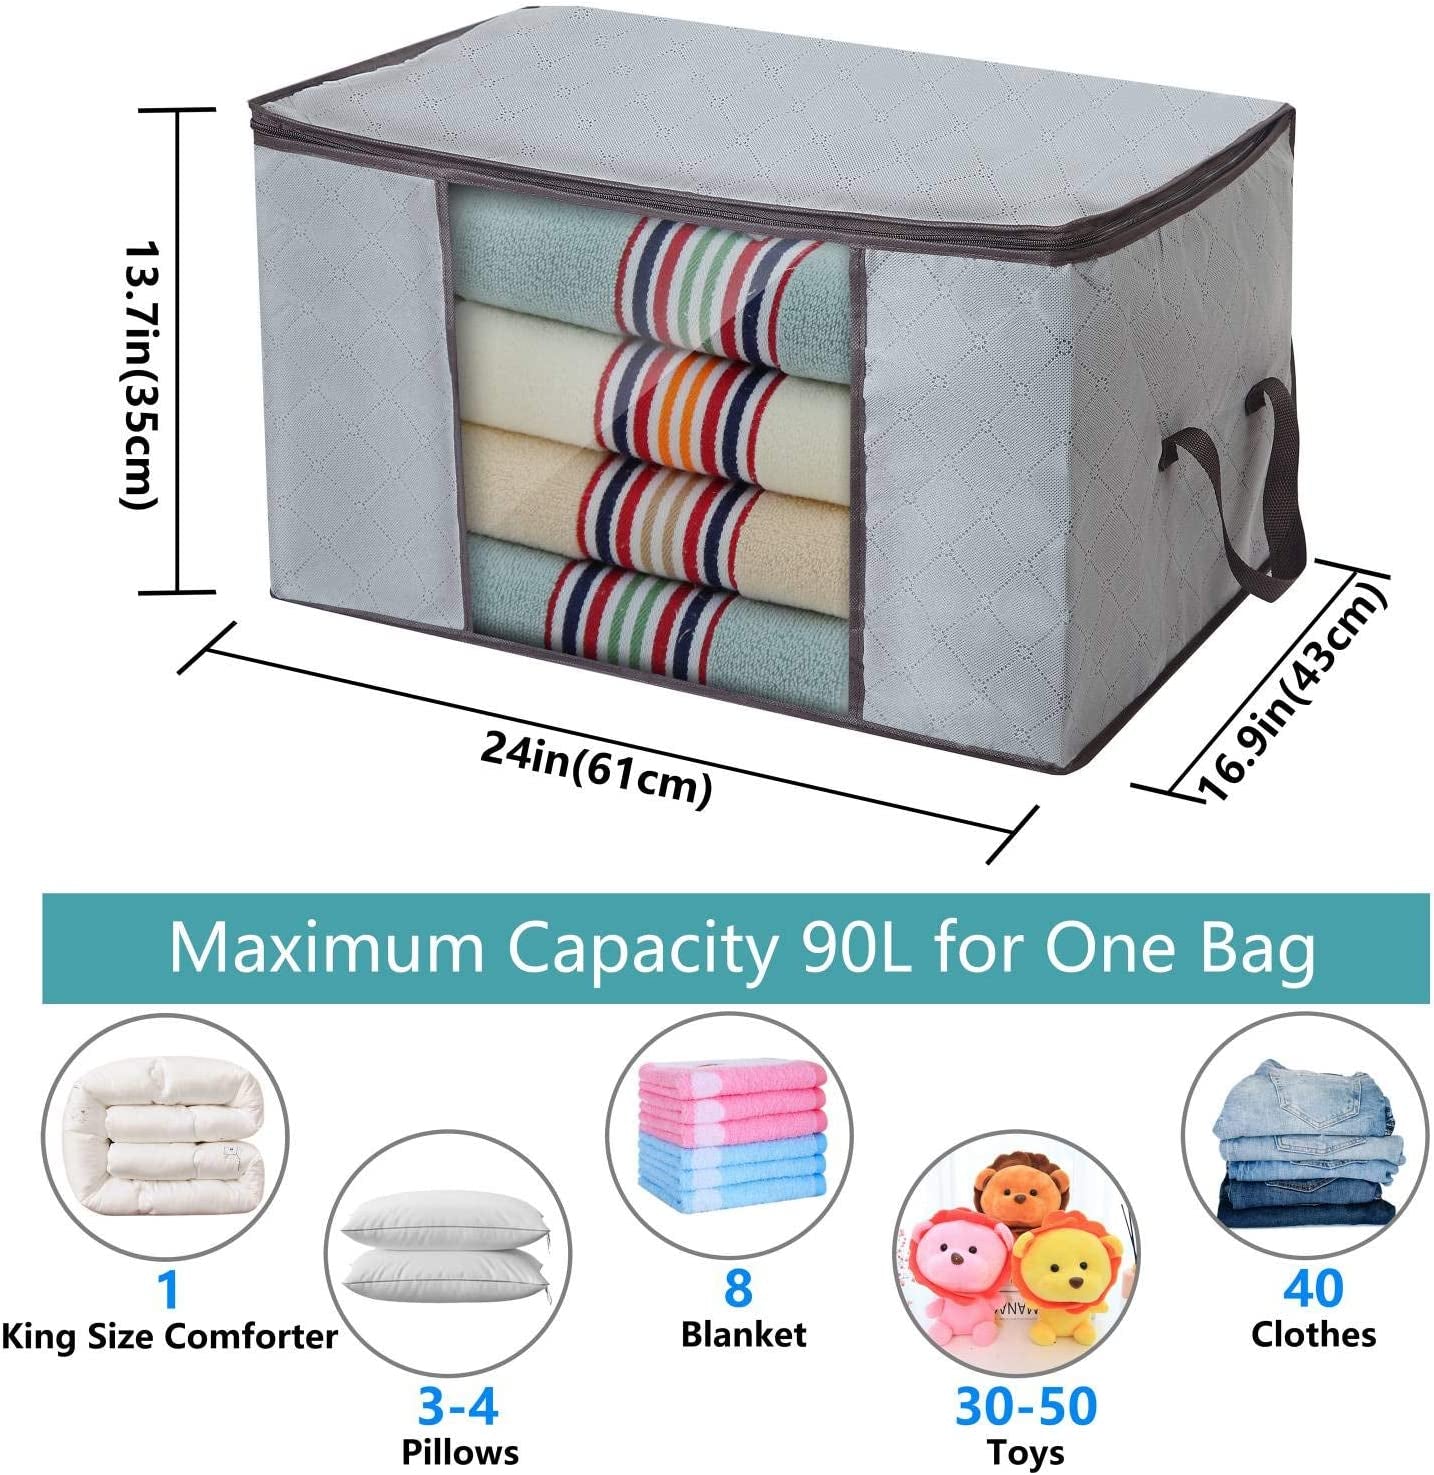 Polarduck Clothes Storage Bag Closet Organizer: Foldable Large Capacity Storage Bin with Clear Window Sturdy Zipper Reinforced Handle for Comforter Bedding Blanket | 3-Pack 90L Grey